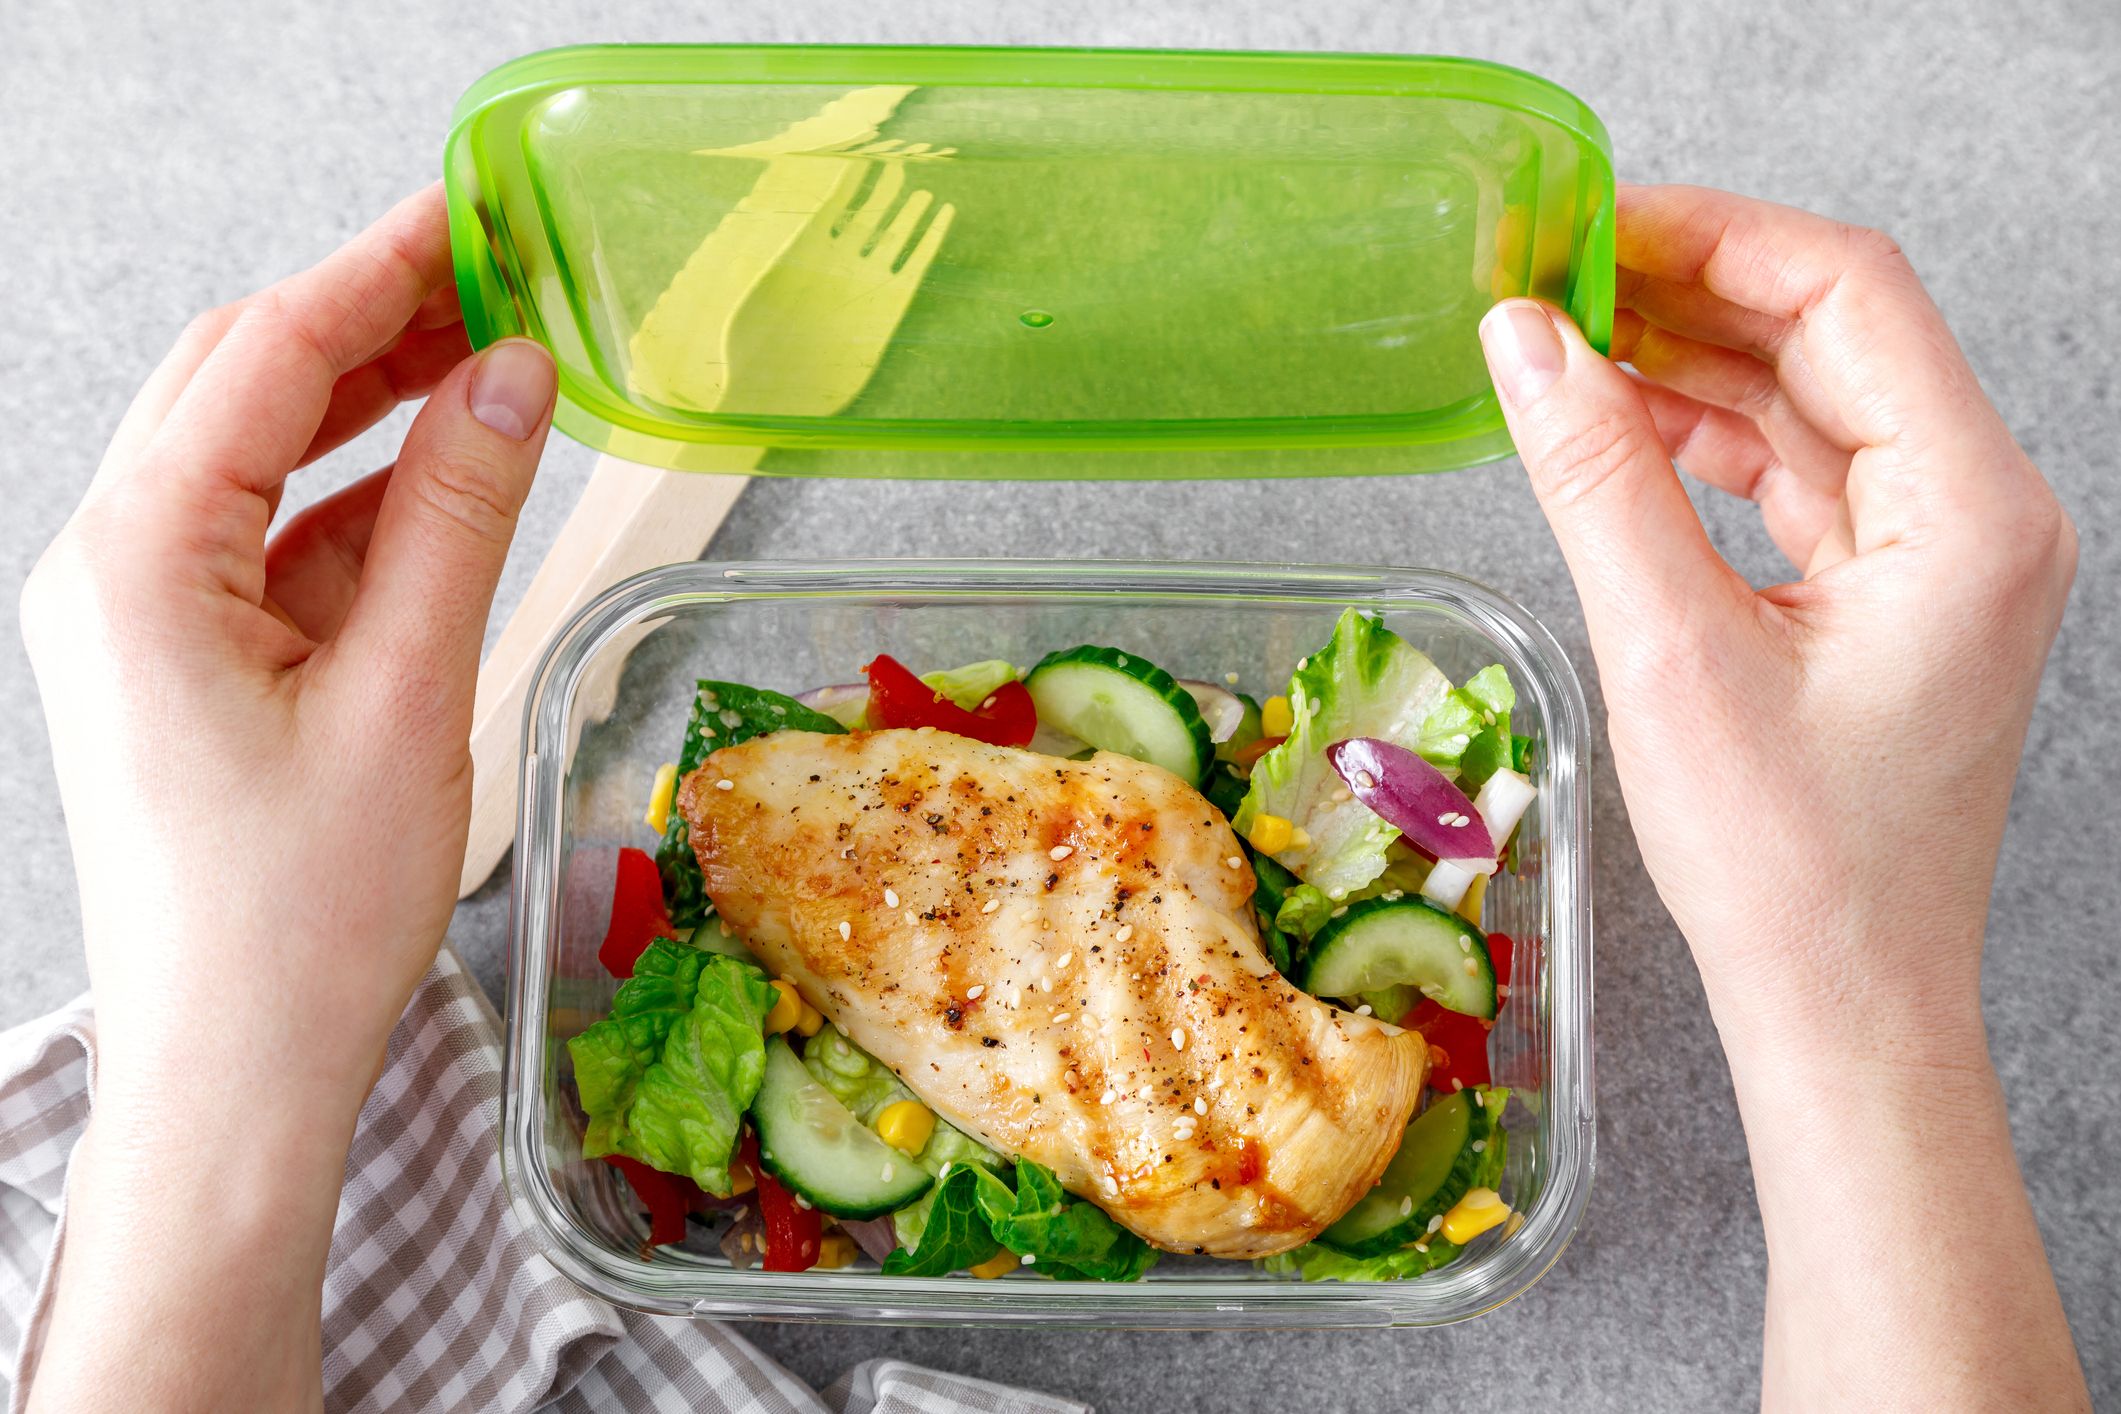 Life Nutritionist Lunch Box Meal Prep Container - Green